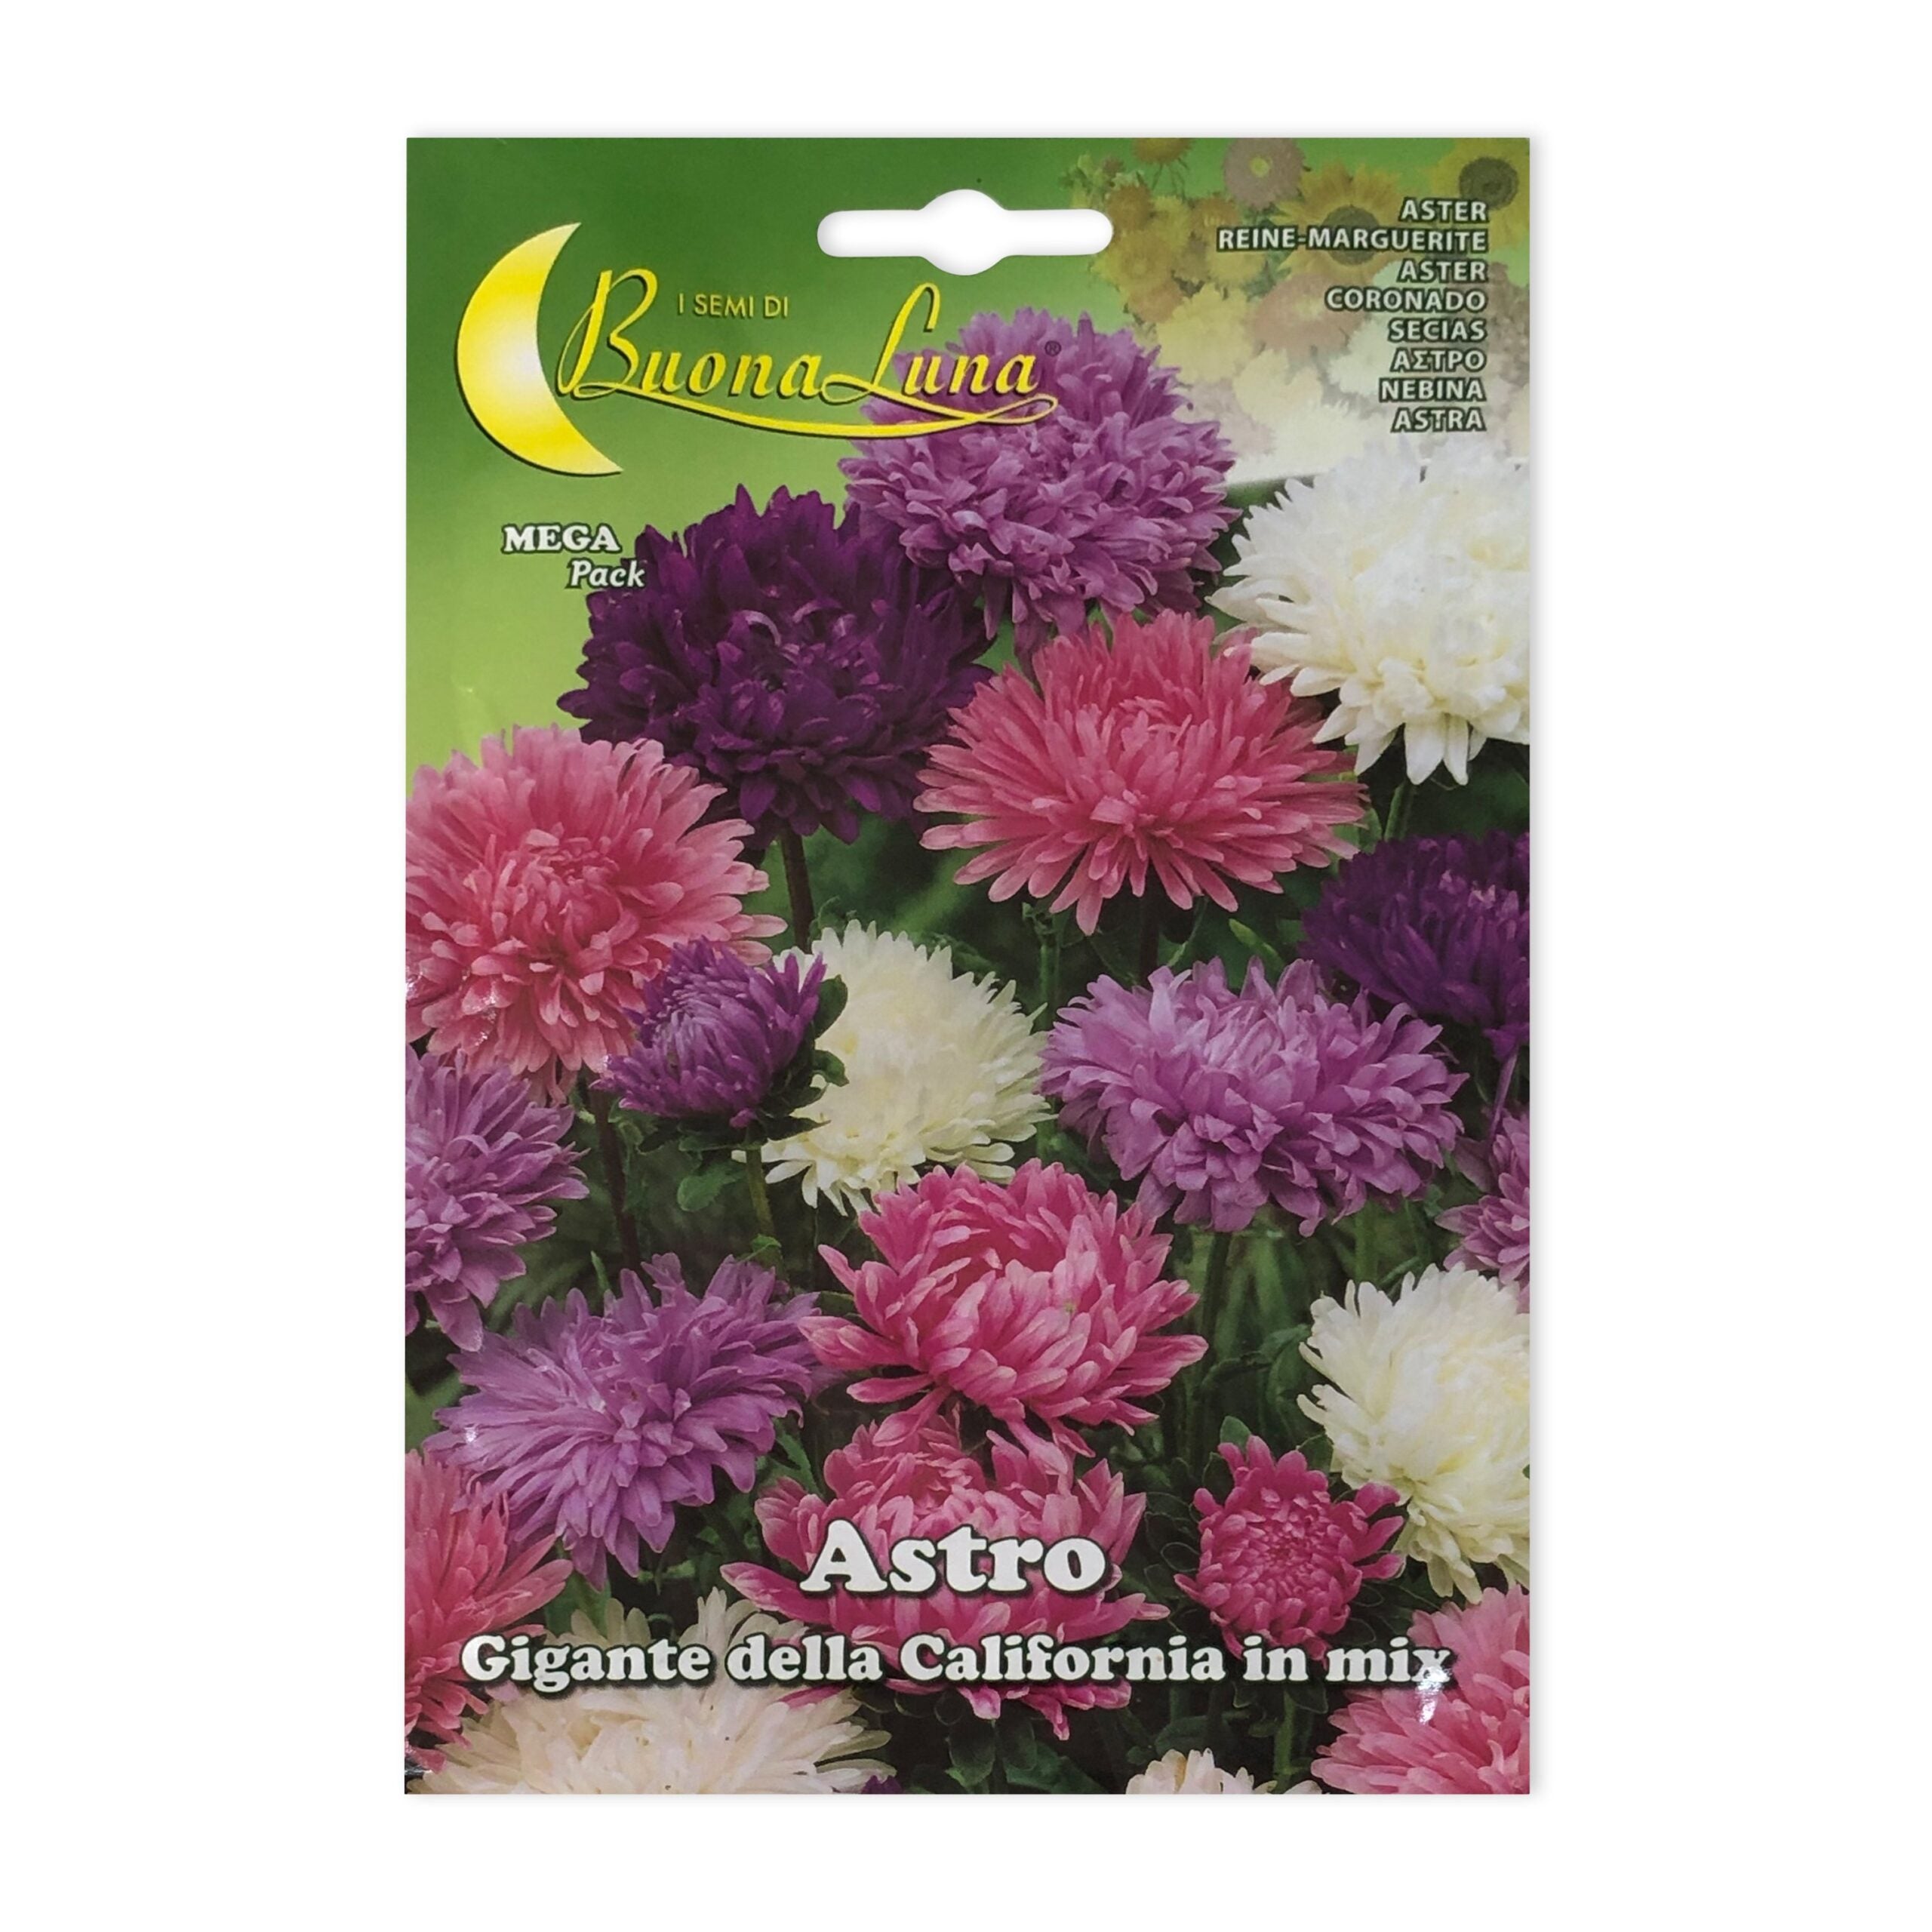 Giant Aster | Seeds